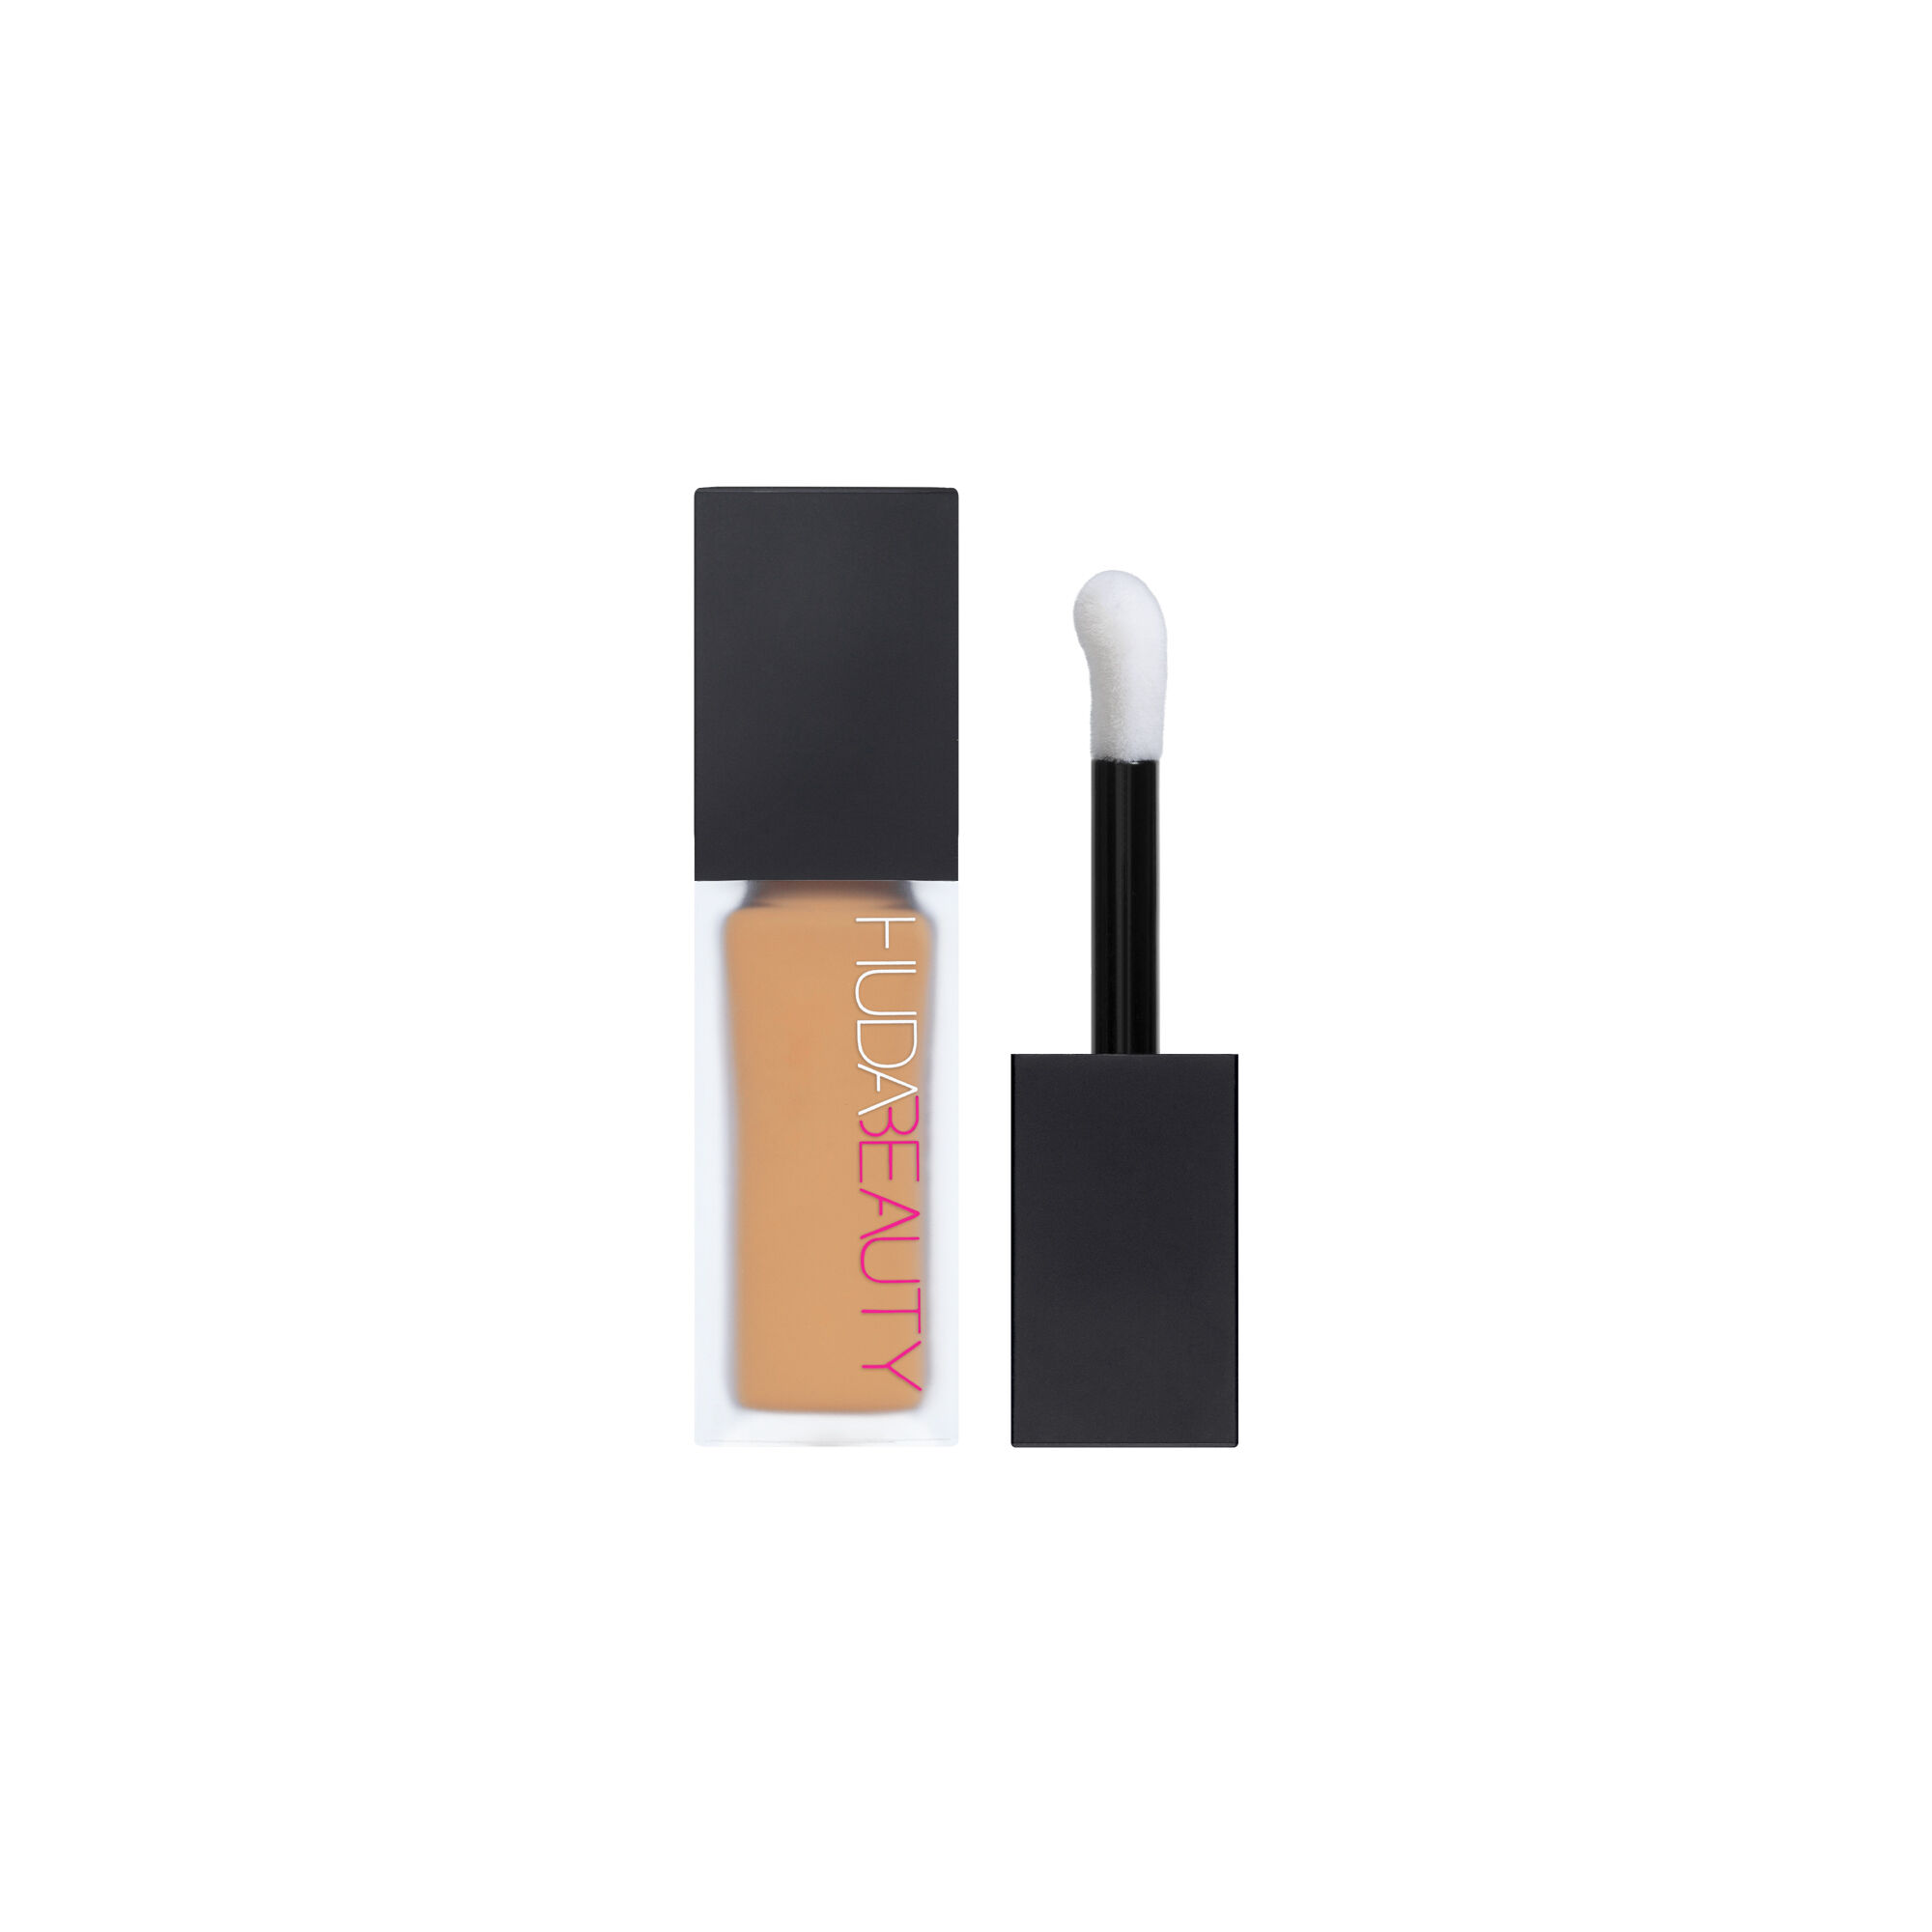 Huda Beauty Faux Filter Concealer Granola 4.5 In White